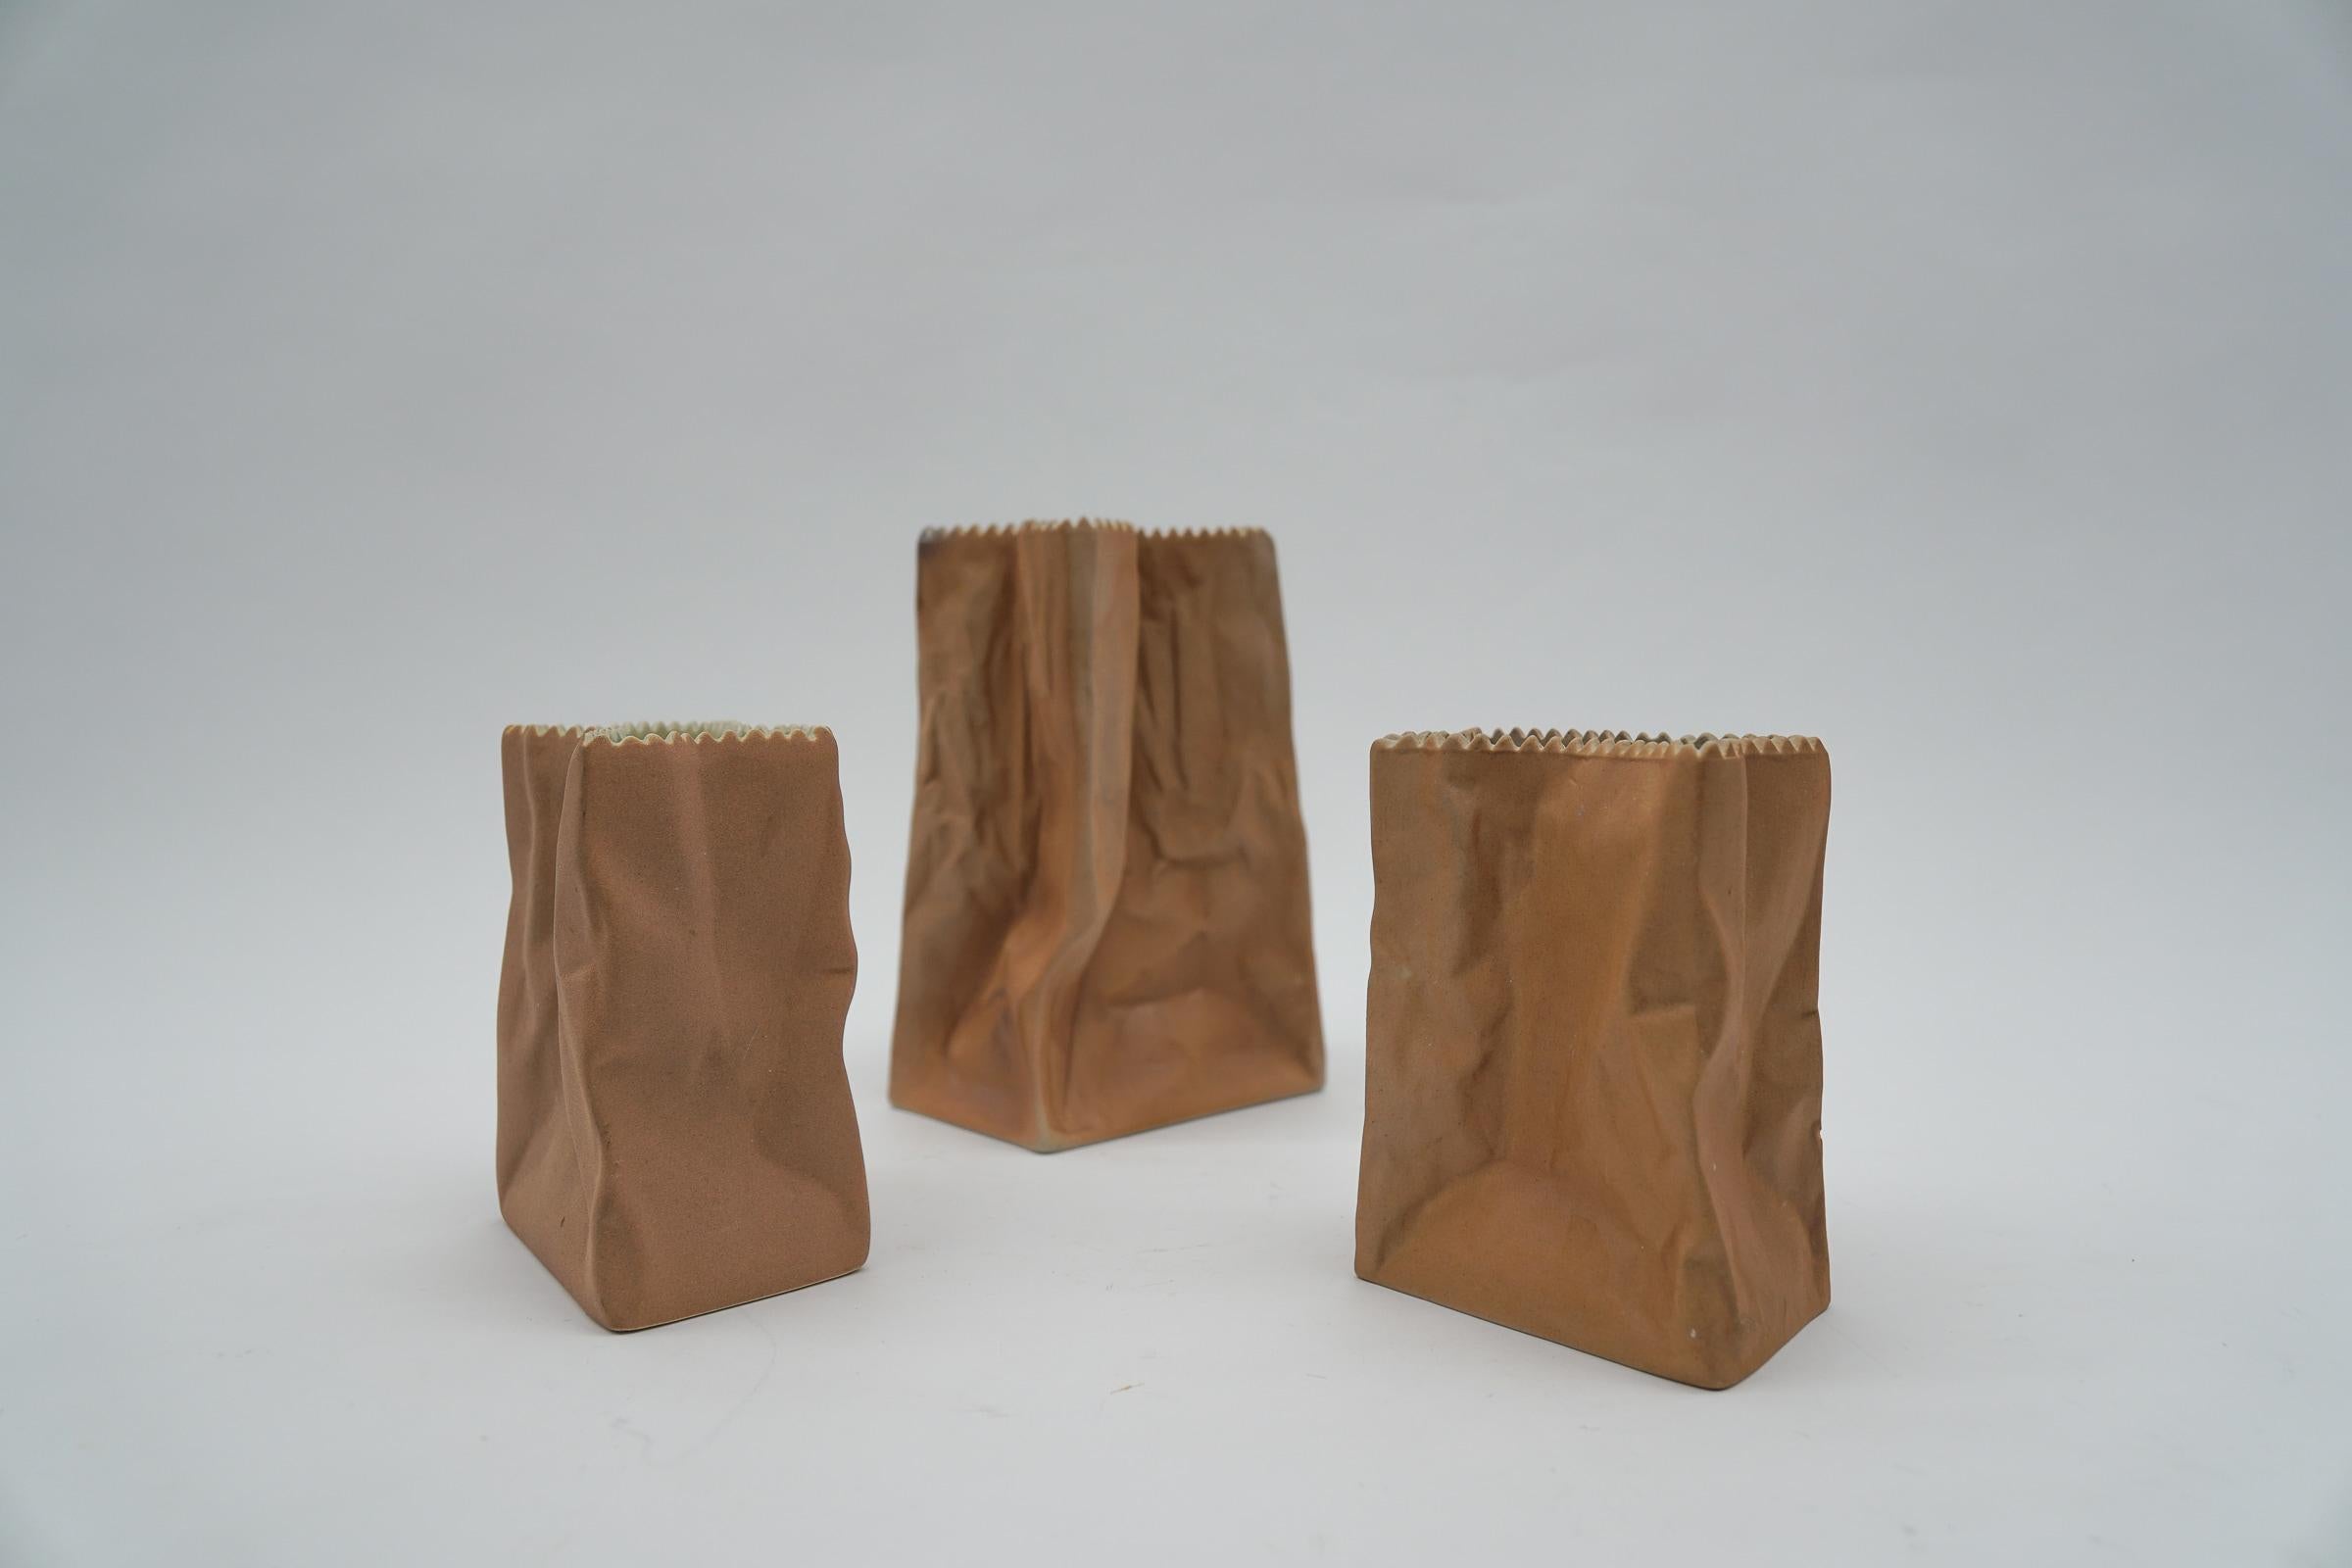 Set of three paper bag vases designed by Tapio Wirkkala and manufactured by Rosenthal, Germany, 1977. 

The large vase is 15cm high, 10cm wide and 6cm deep. 
The small vase is 10cm high, 8cm wide and 5cm deep.

This vases are made of porcelain